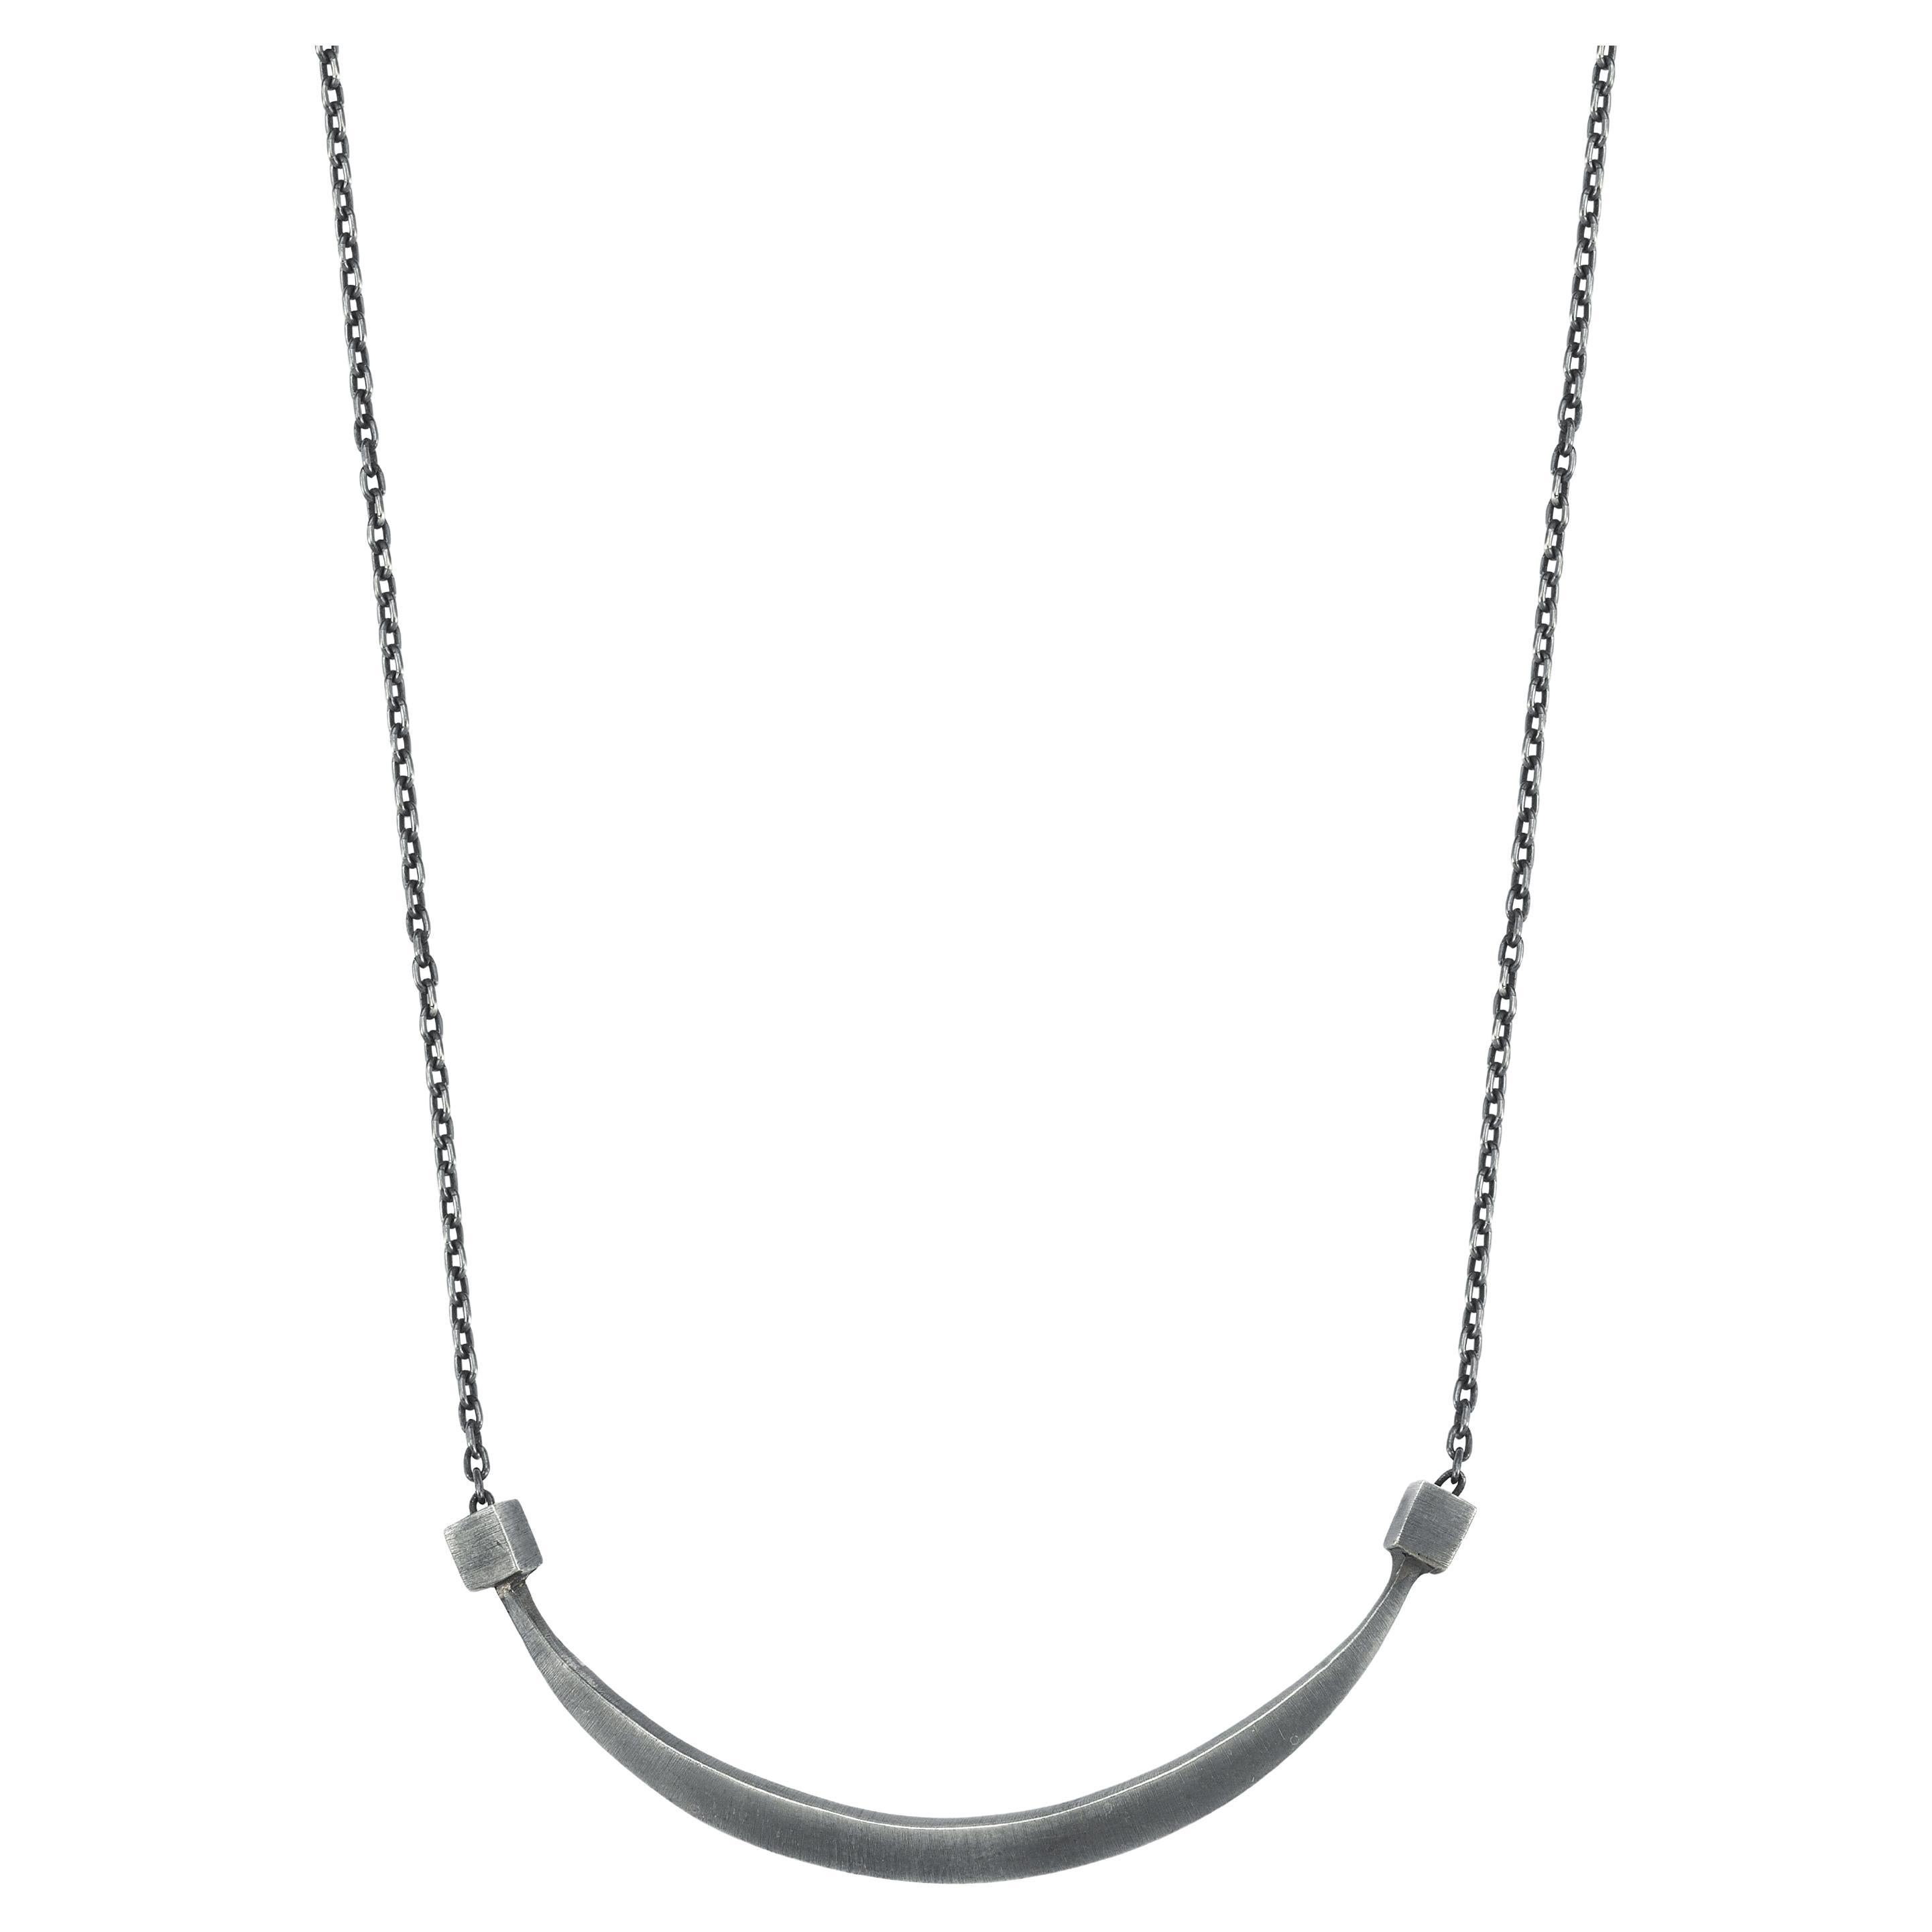 Oxidised Silver Smile Bar Necklace